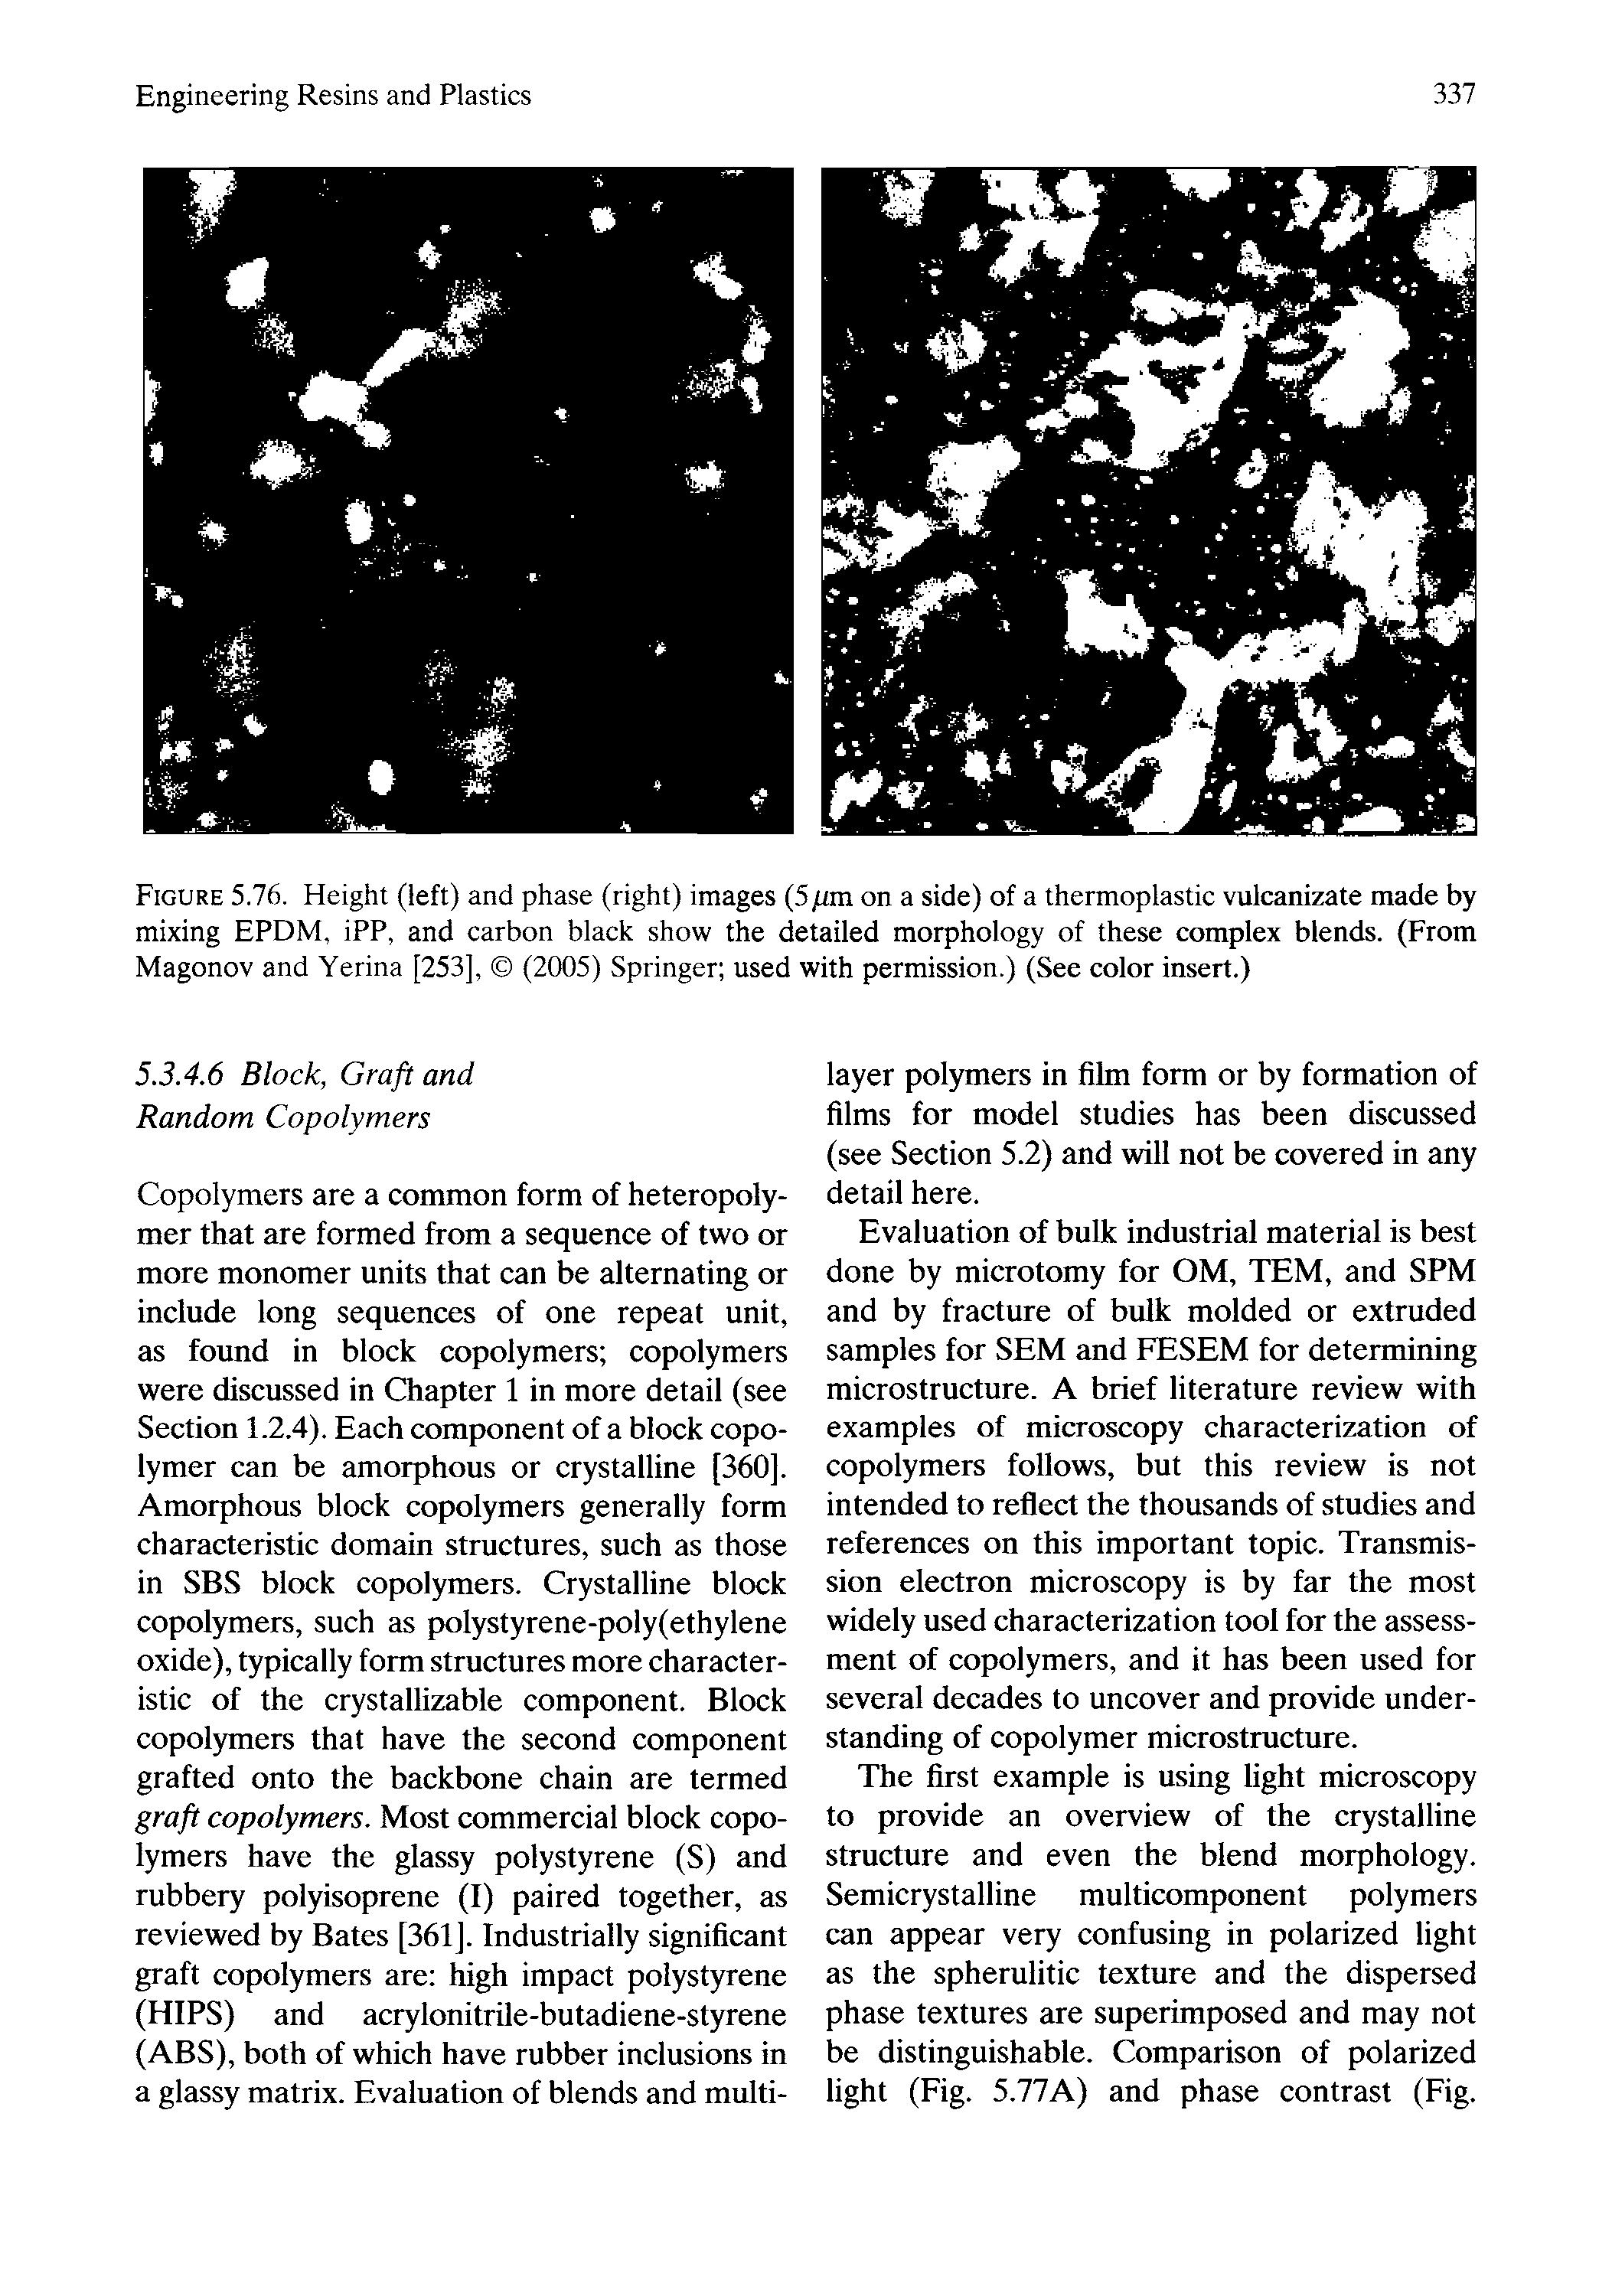 Figure 5.76. Height (left) and phase (right) images (5pm on a side) of a thermoplastic vulcanizate made by mixing EPDM, iPP, and carbon black show the detailed morphology of these complex blends. (From Magonov and Yerina [253], (2005) Springer used with permission.) (See color insert.)...